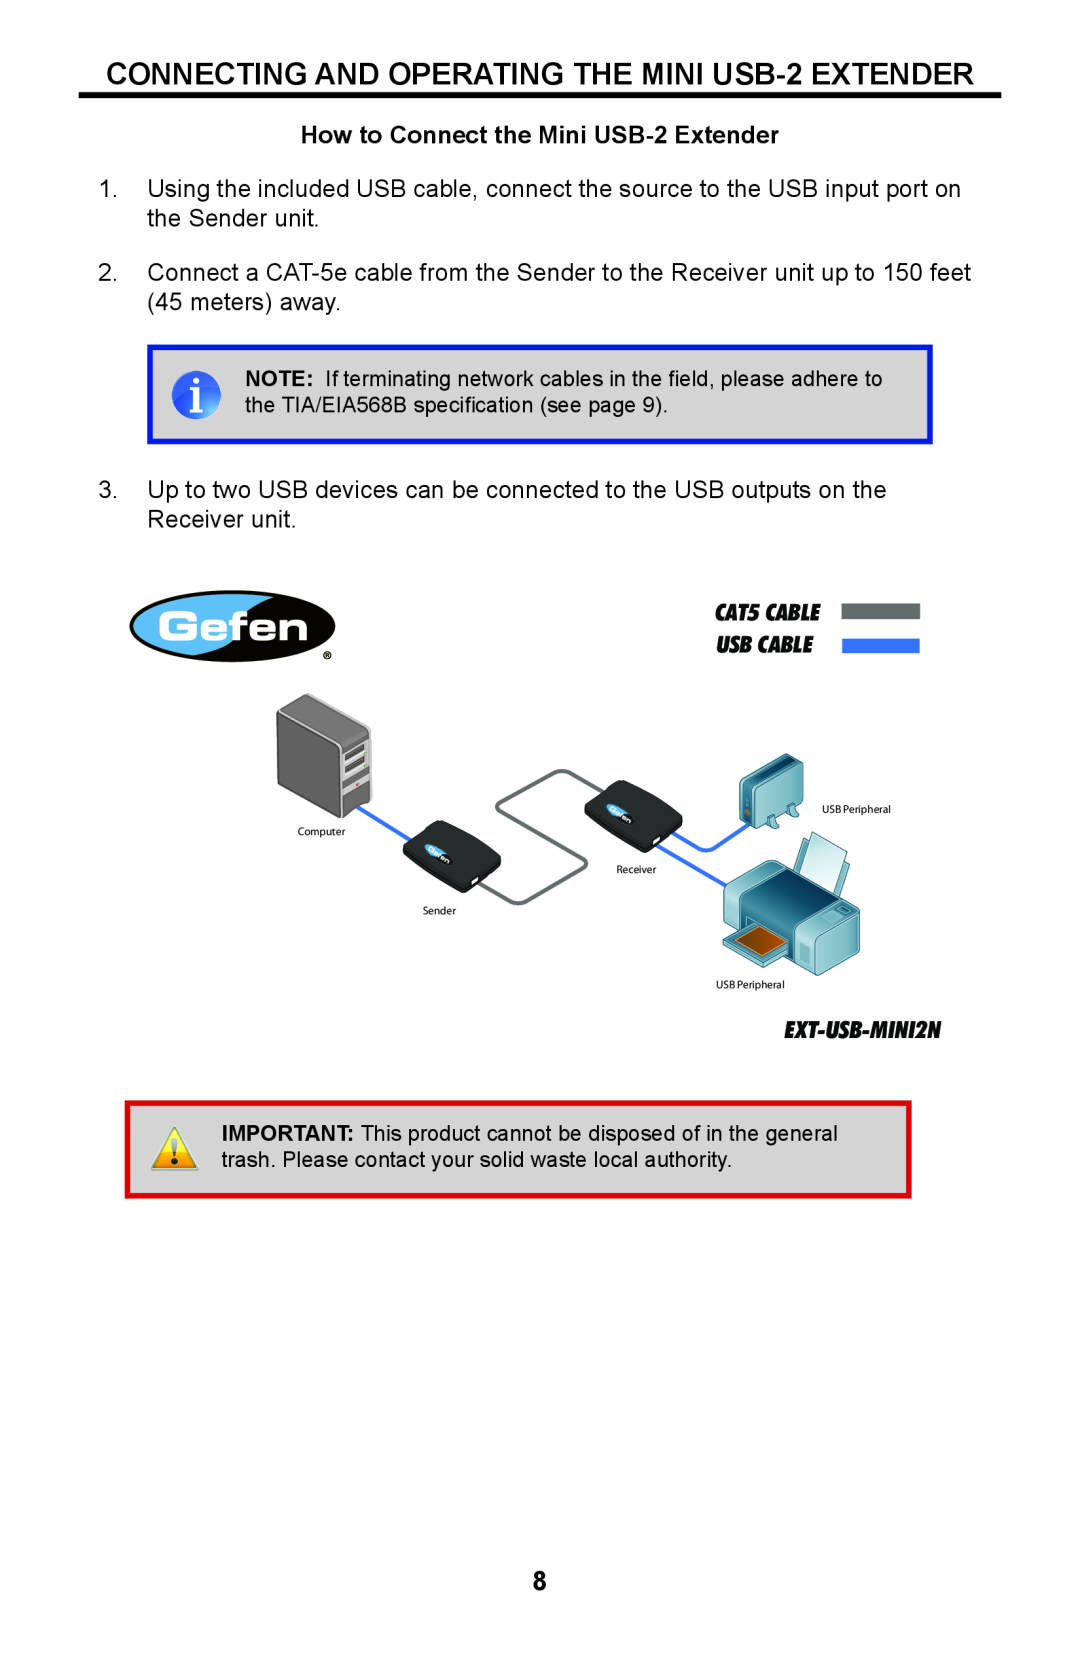 Gefen ext-usb-mini2n user manual CONNECTING AND OPERATING THE MINI USB-2 EXTENDER, How to Connect the Mini USB-2 Extender 